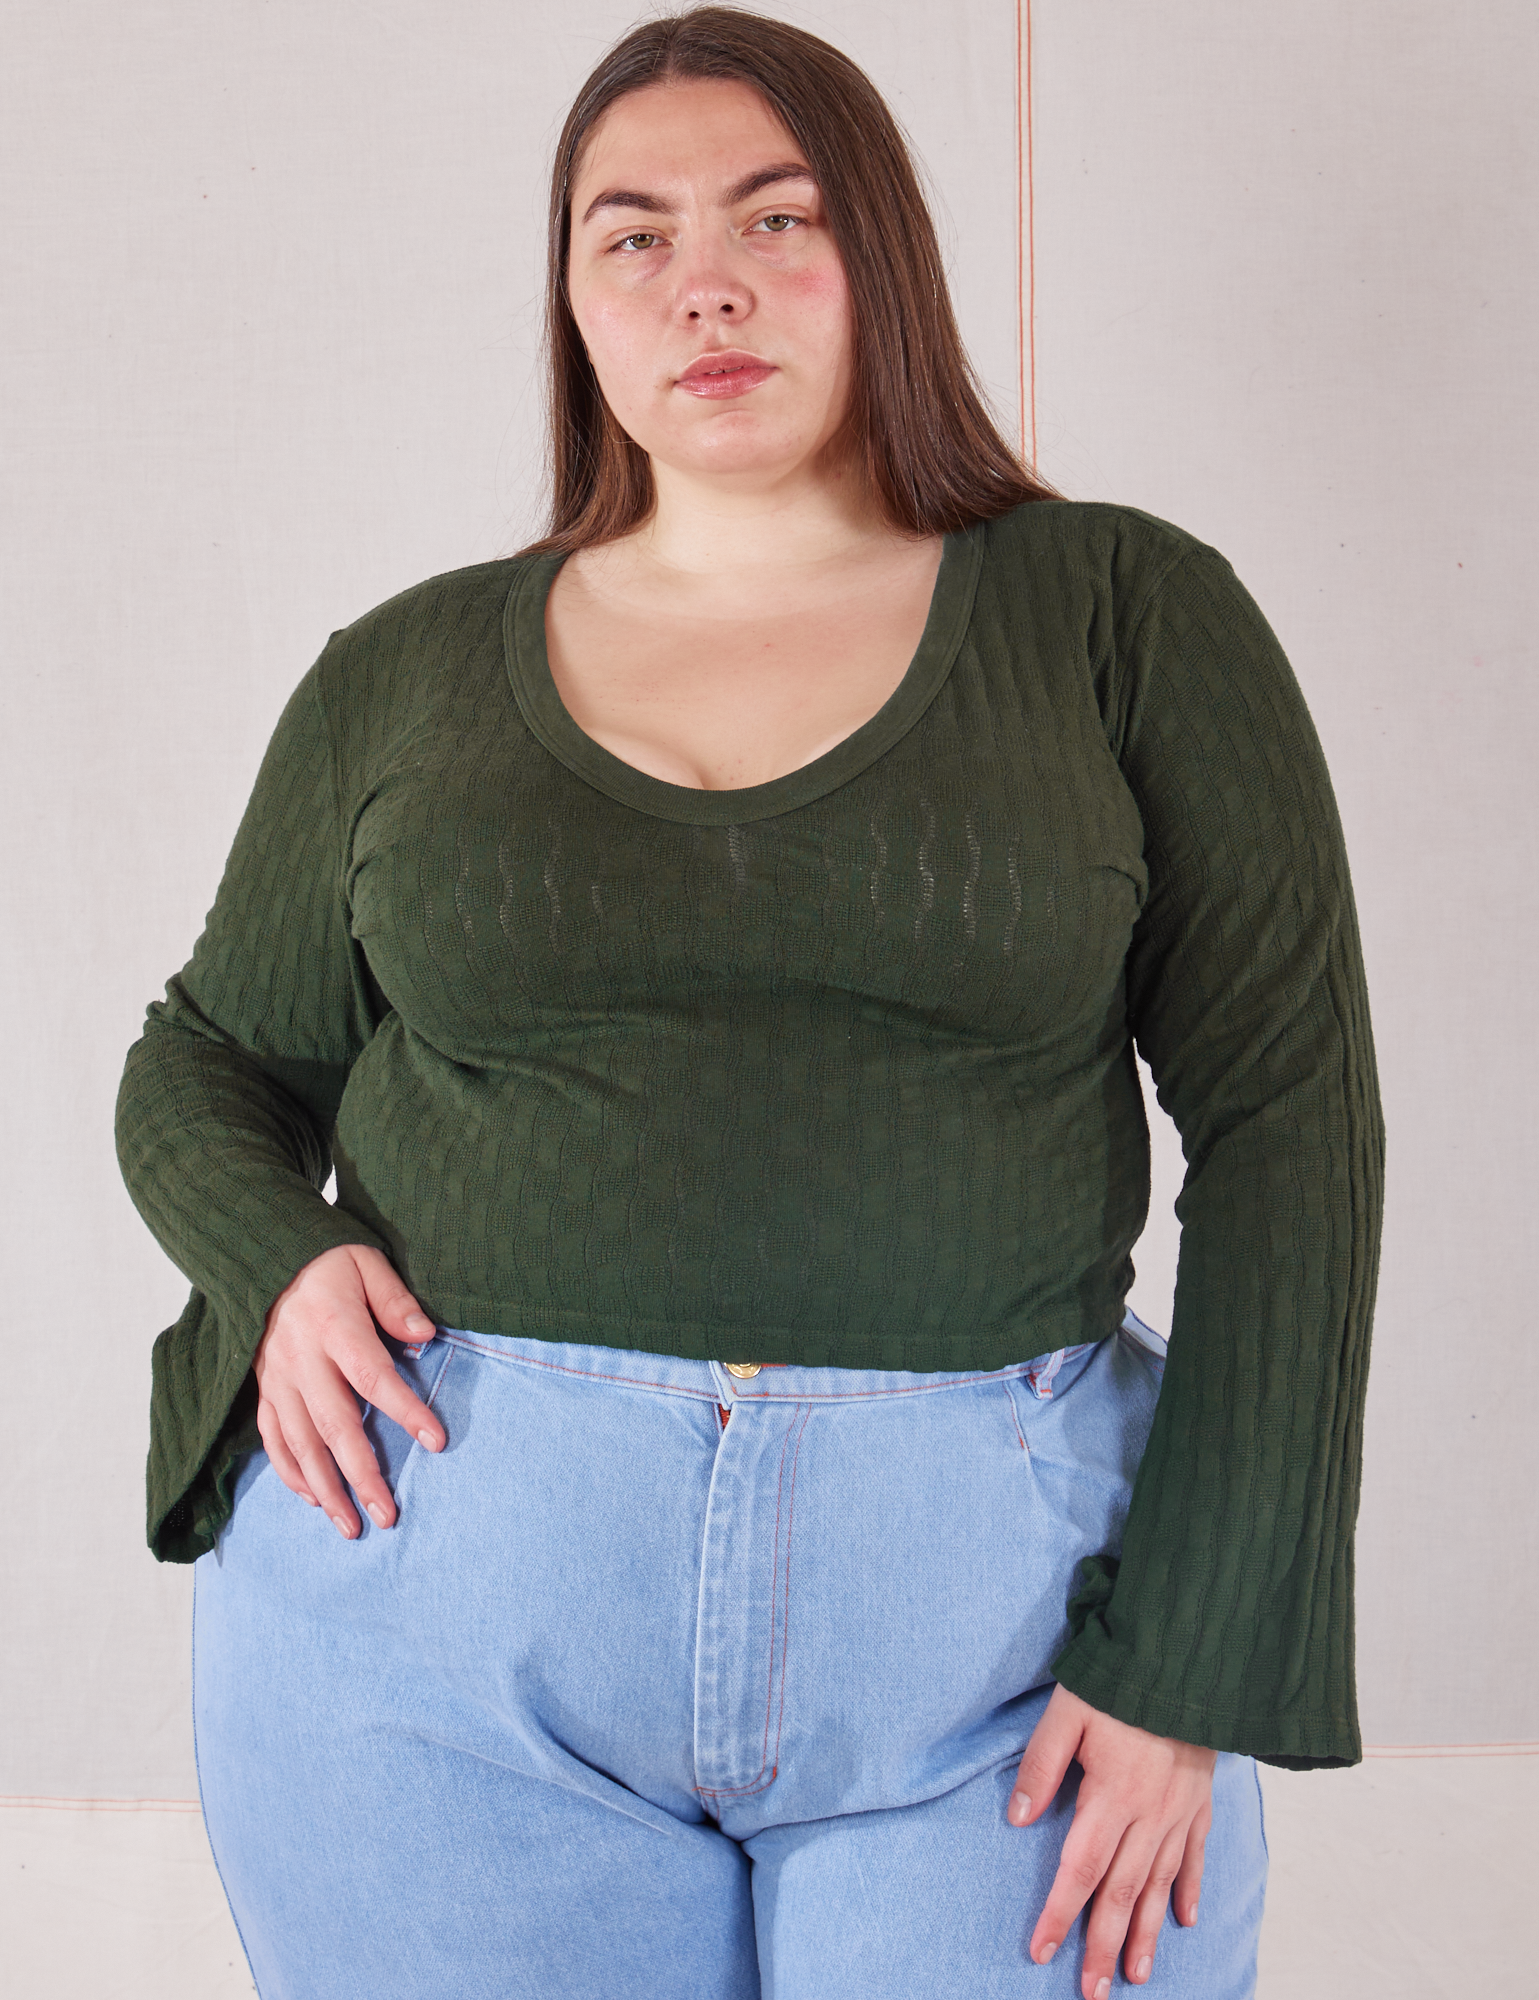 Marielena is 5&#39;8&quot; and wearing 1XL Bell Sleeve Top in Swamp Green